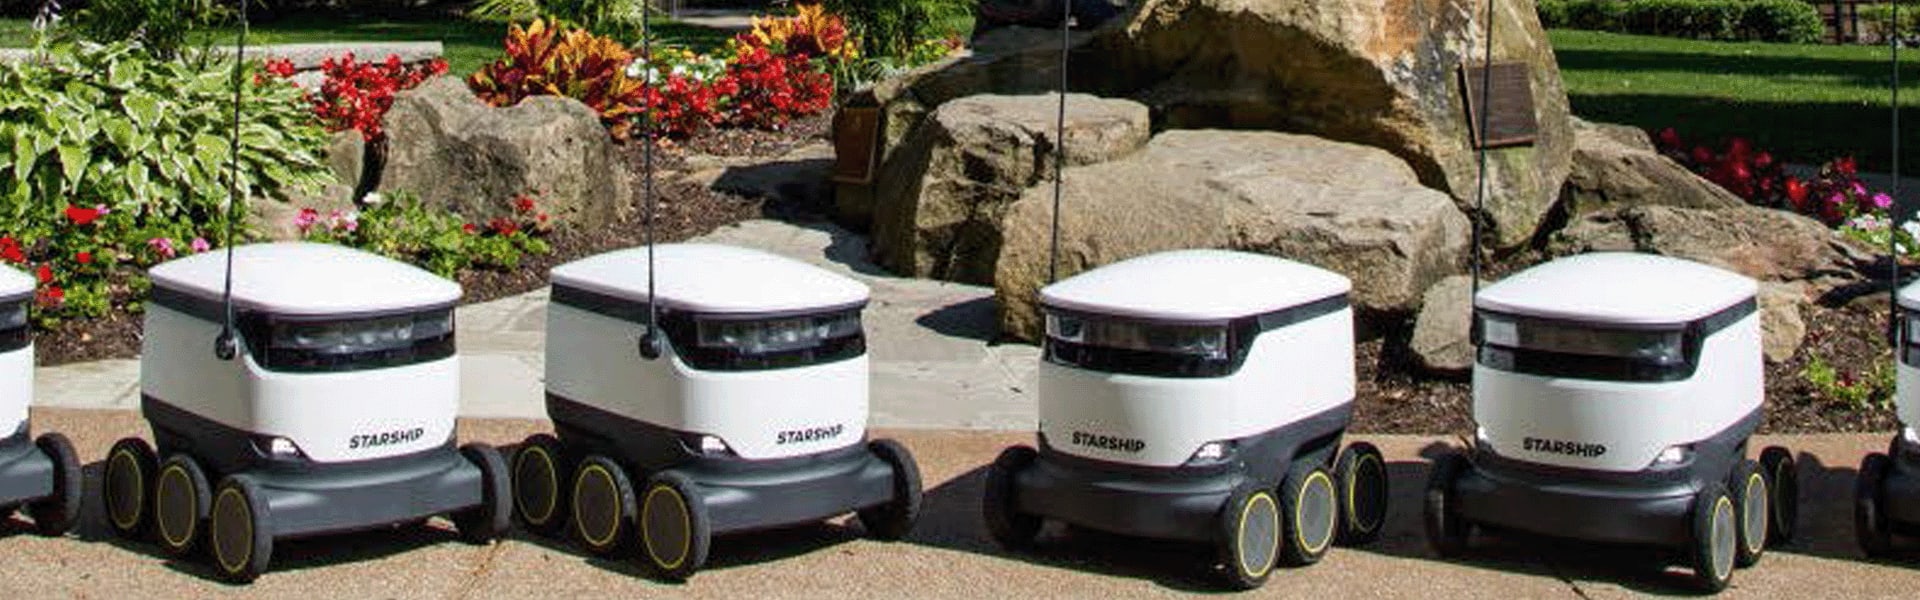 Drone delivery robots